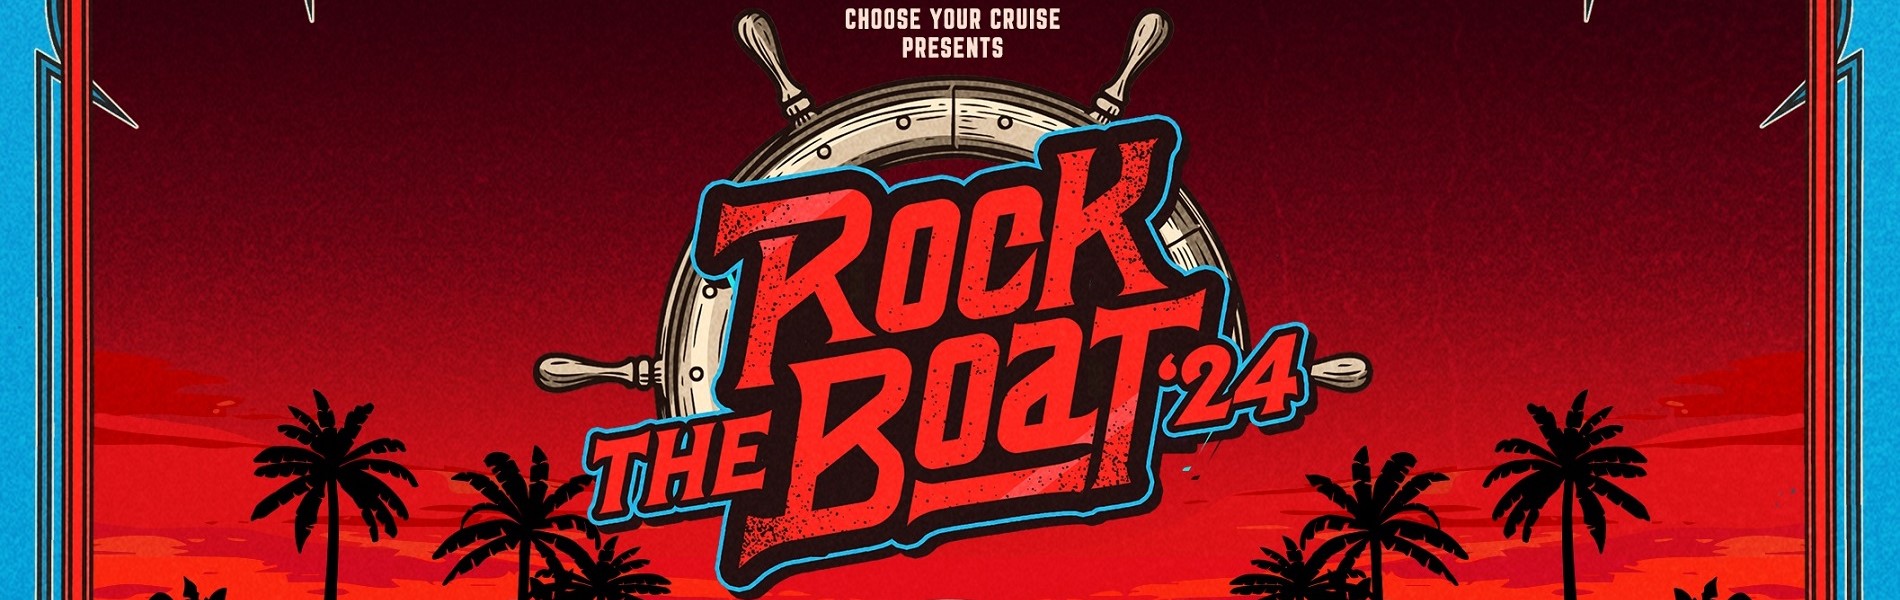 Rock the Boat 2024